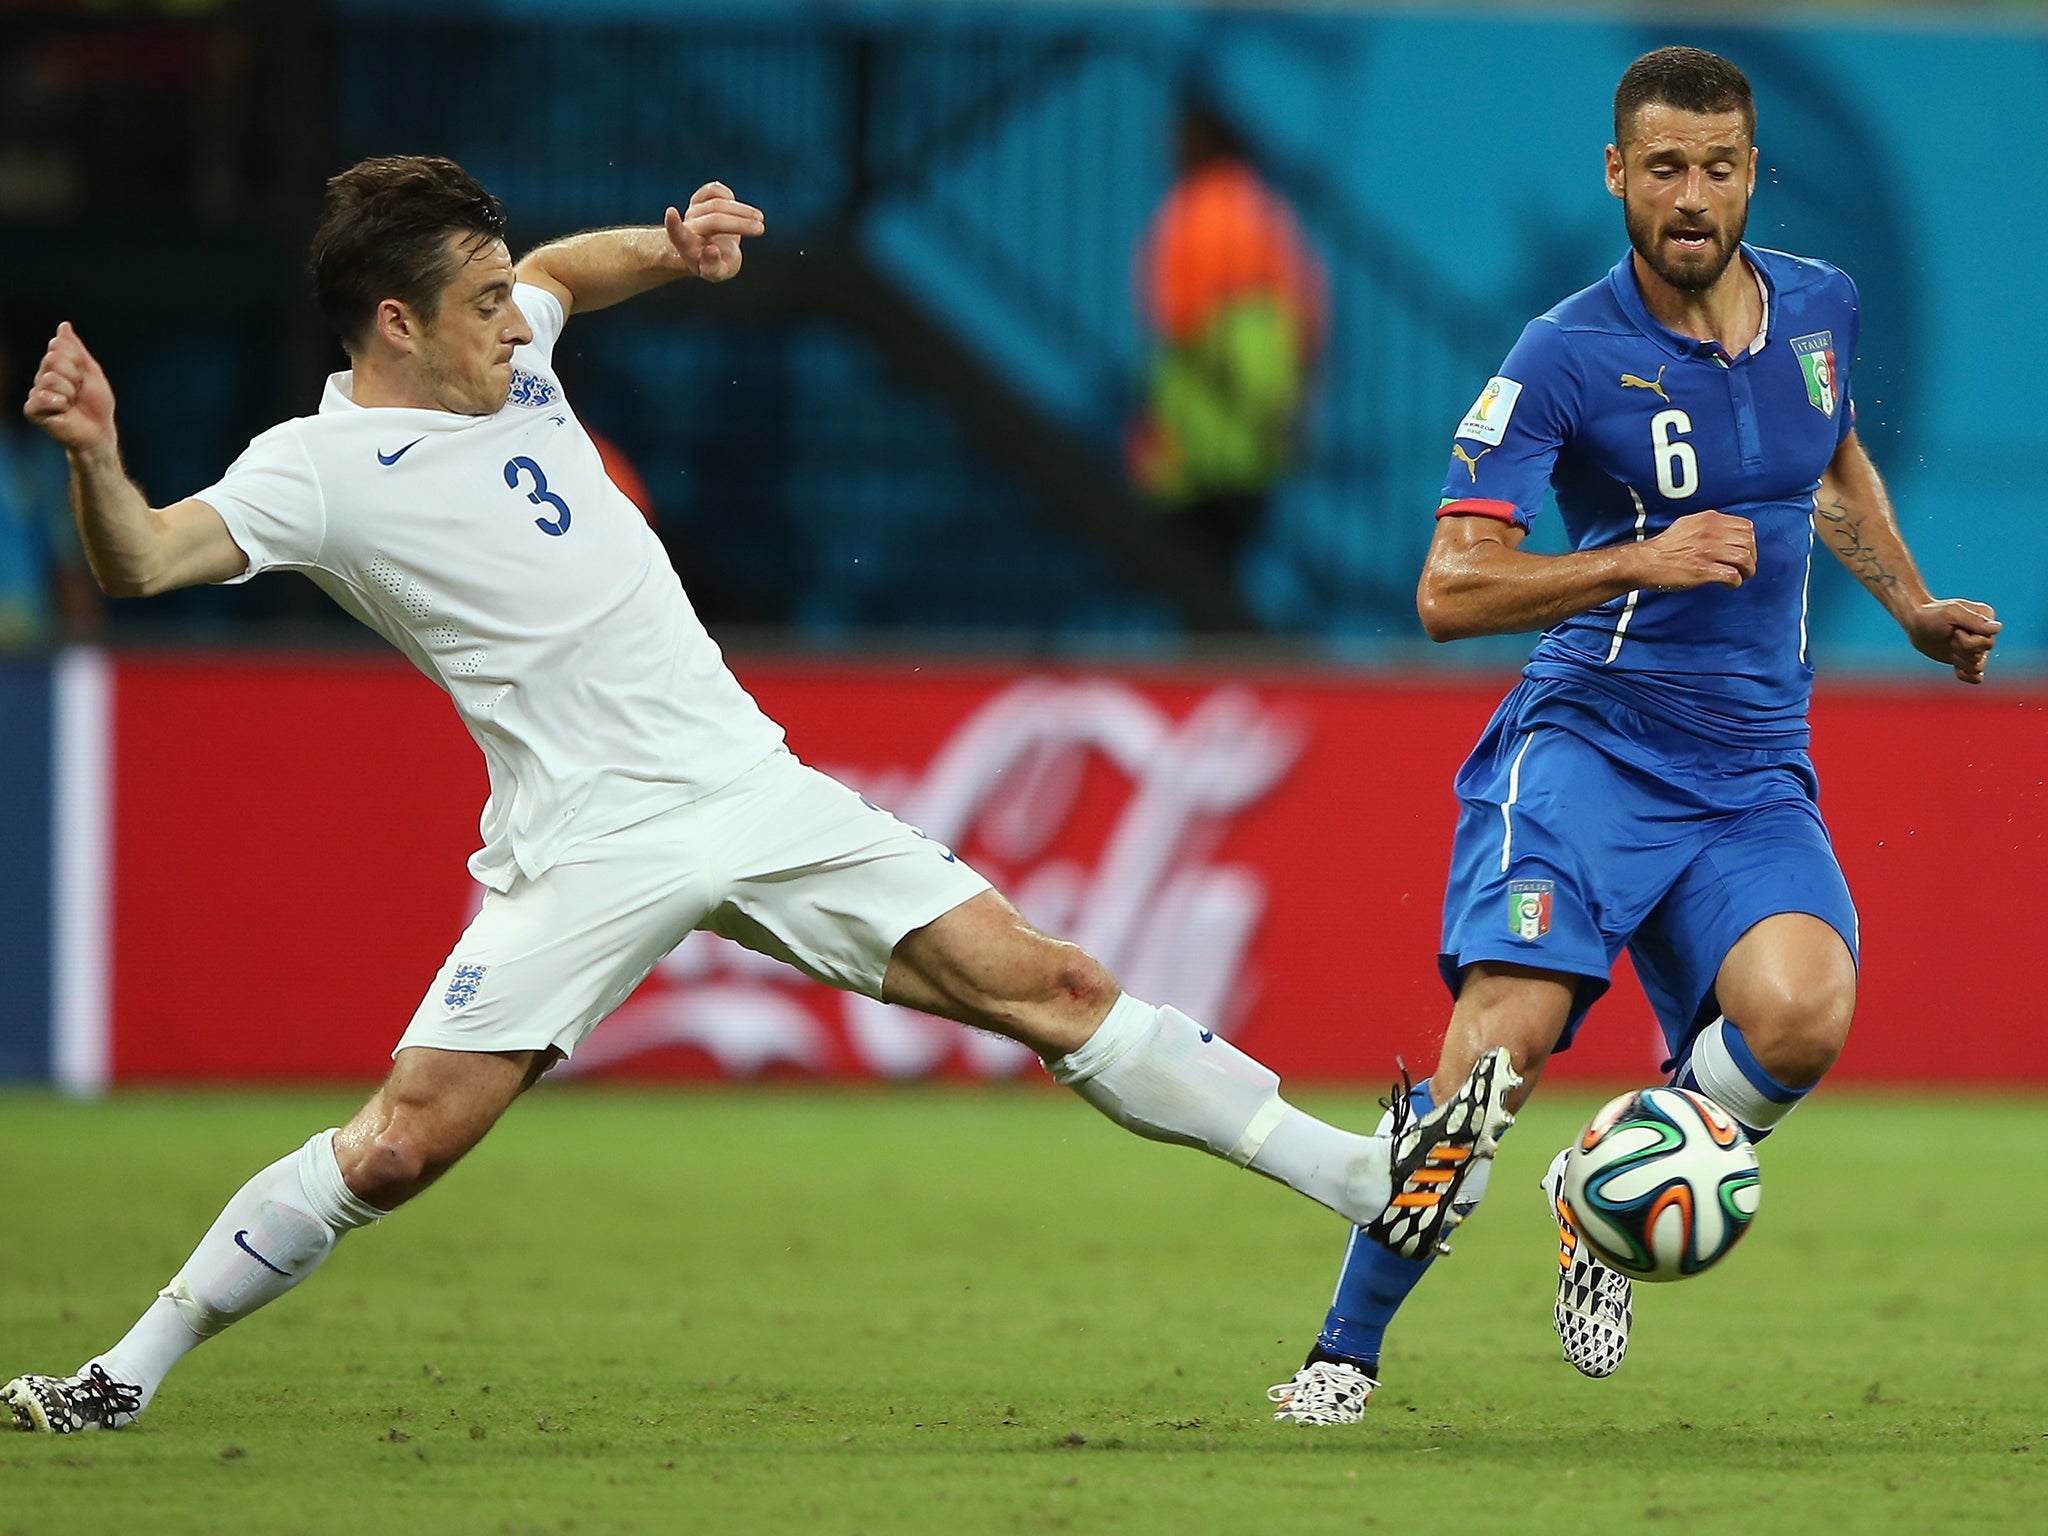 Leighton Baines in action against Italy